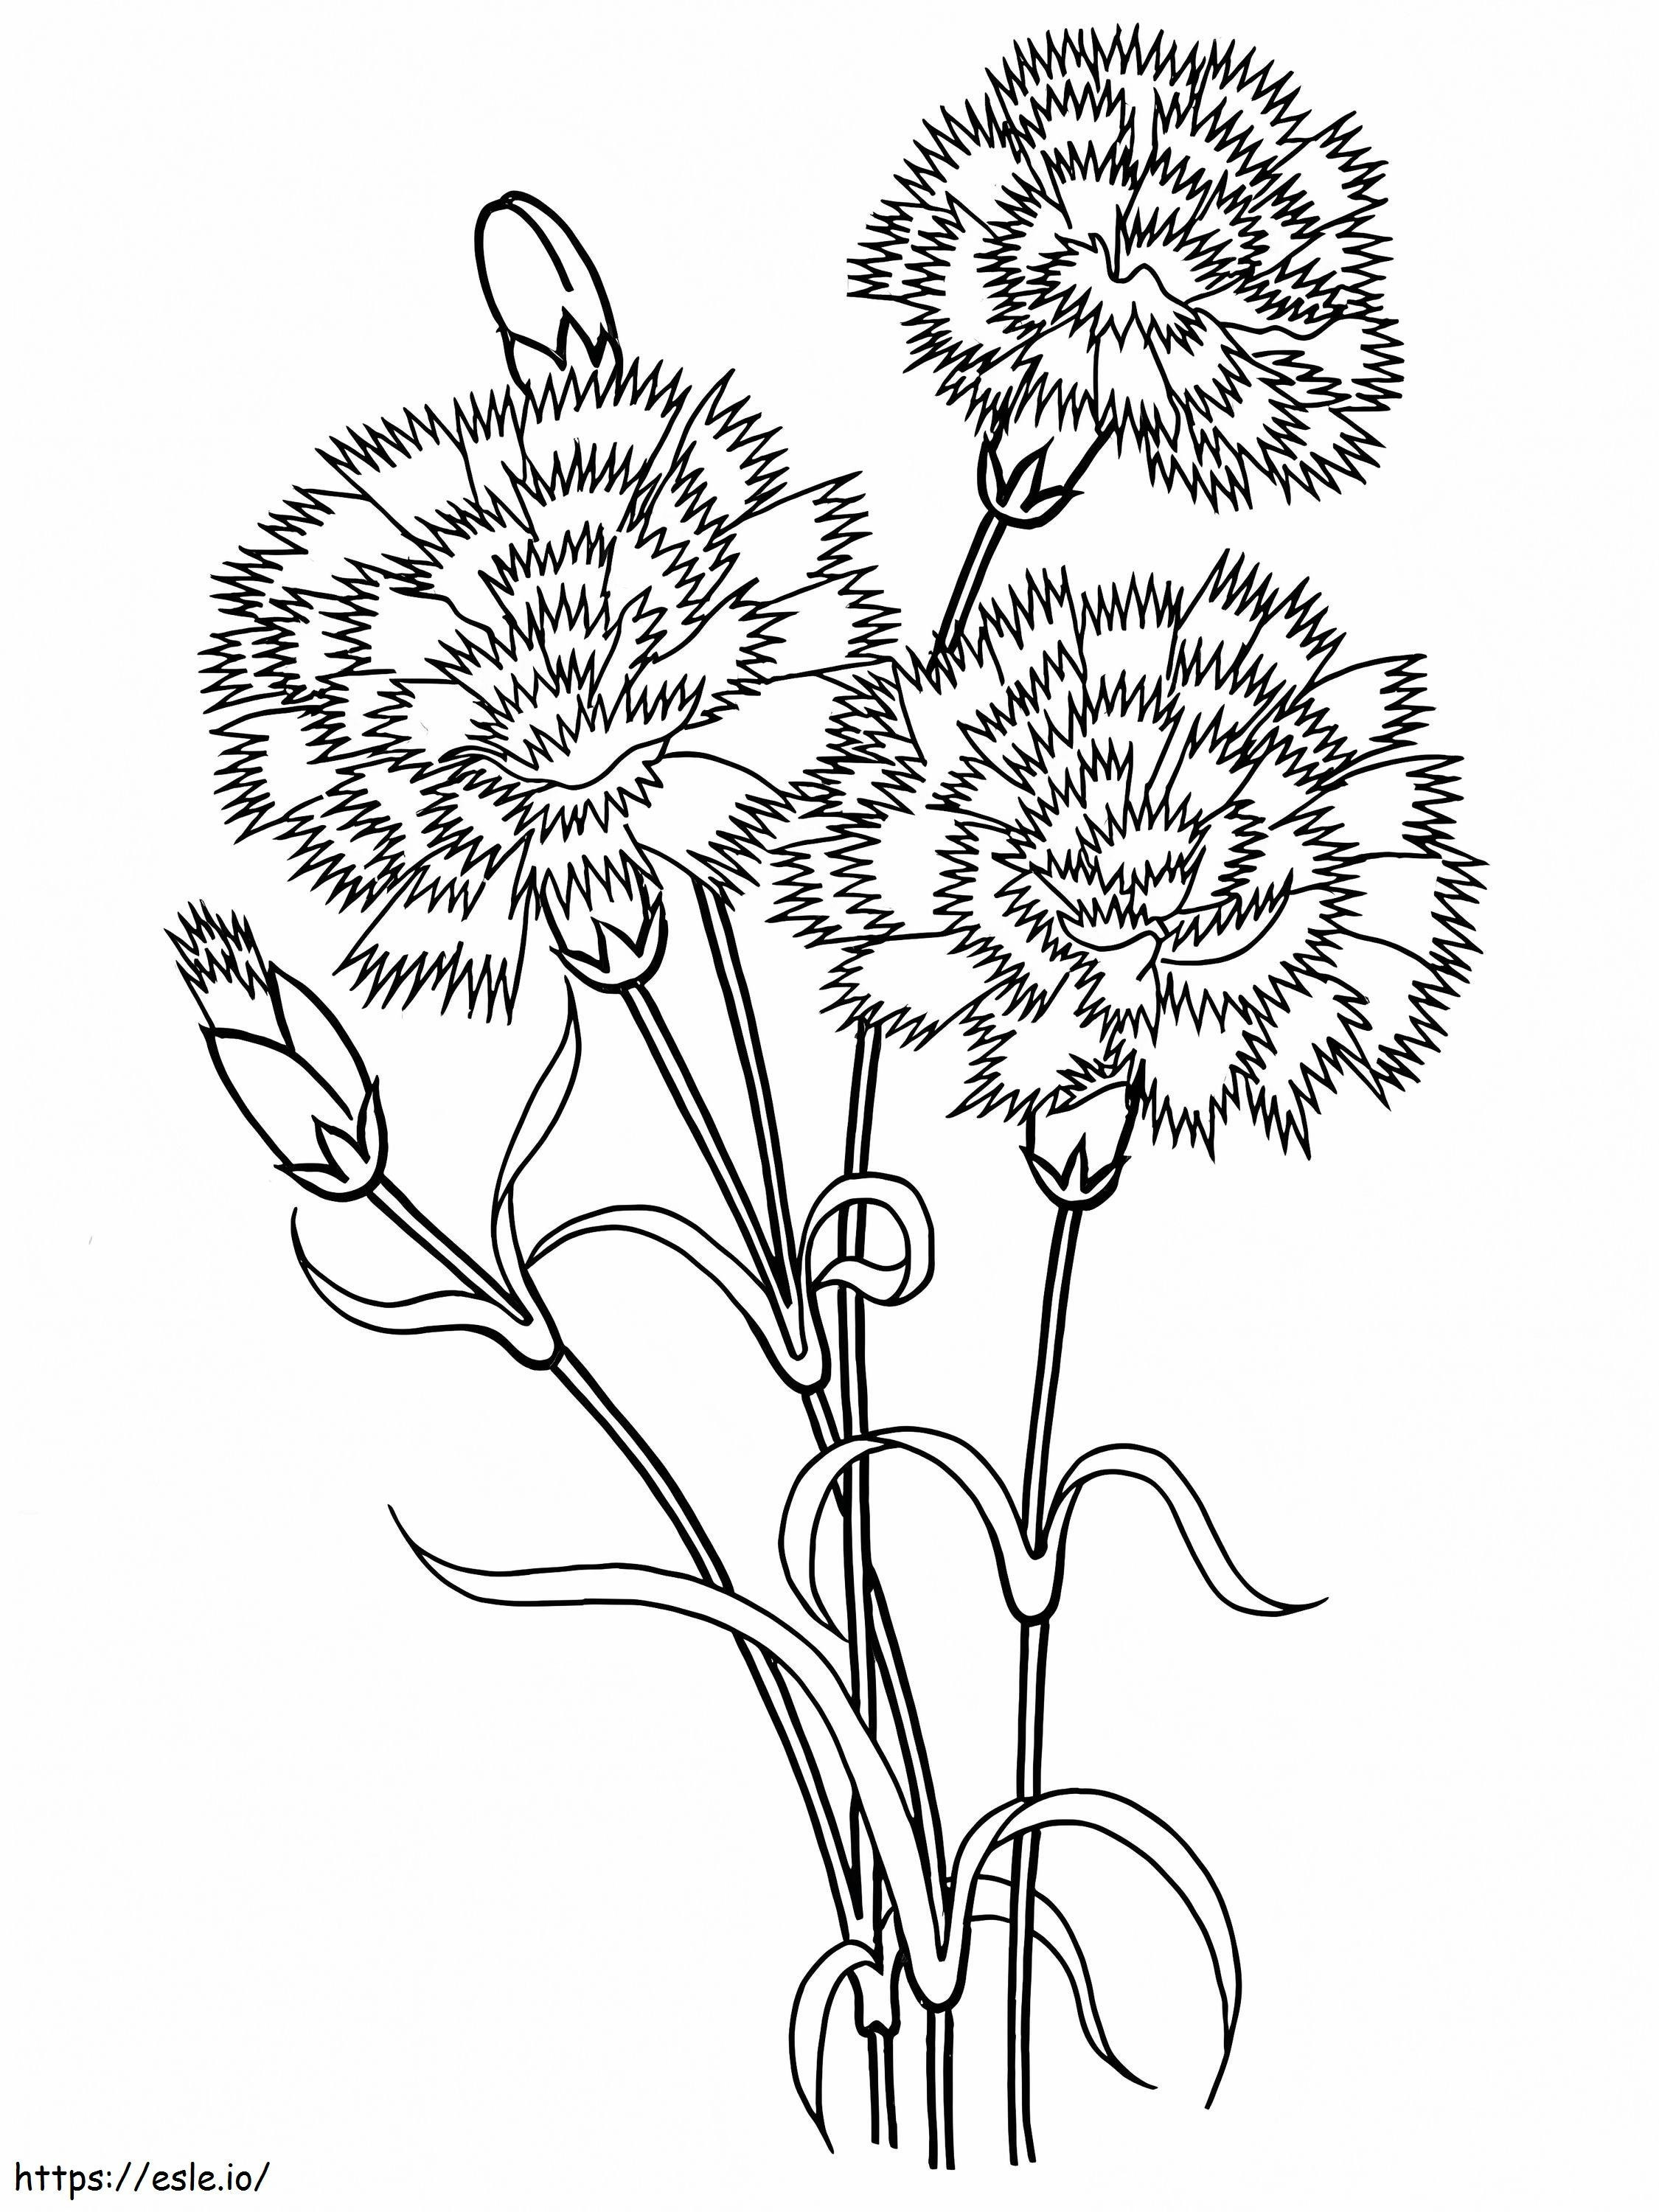 Three Carnations coloring page